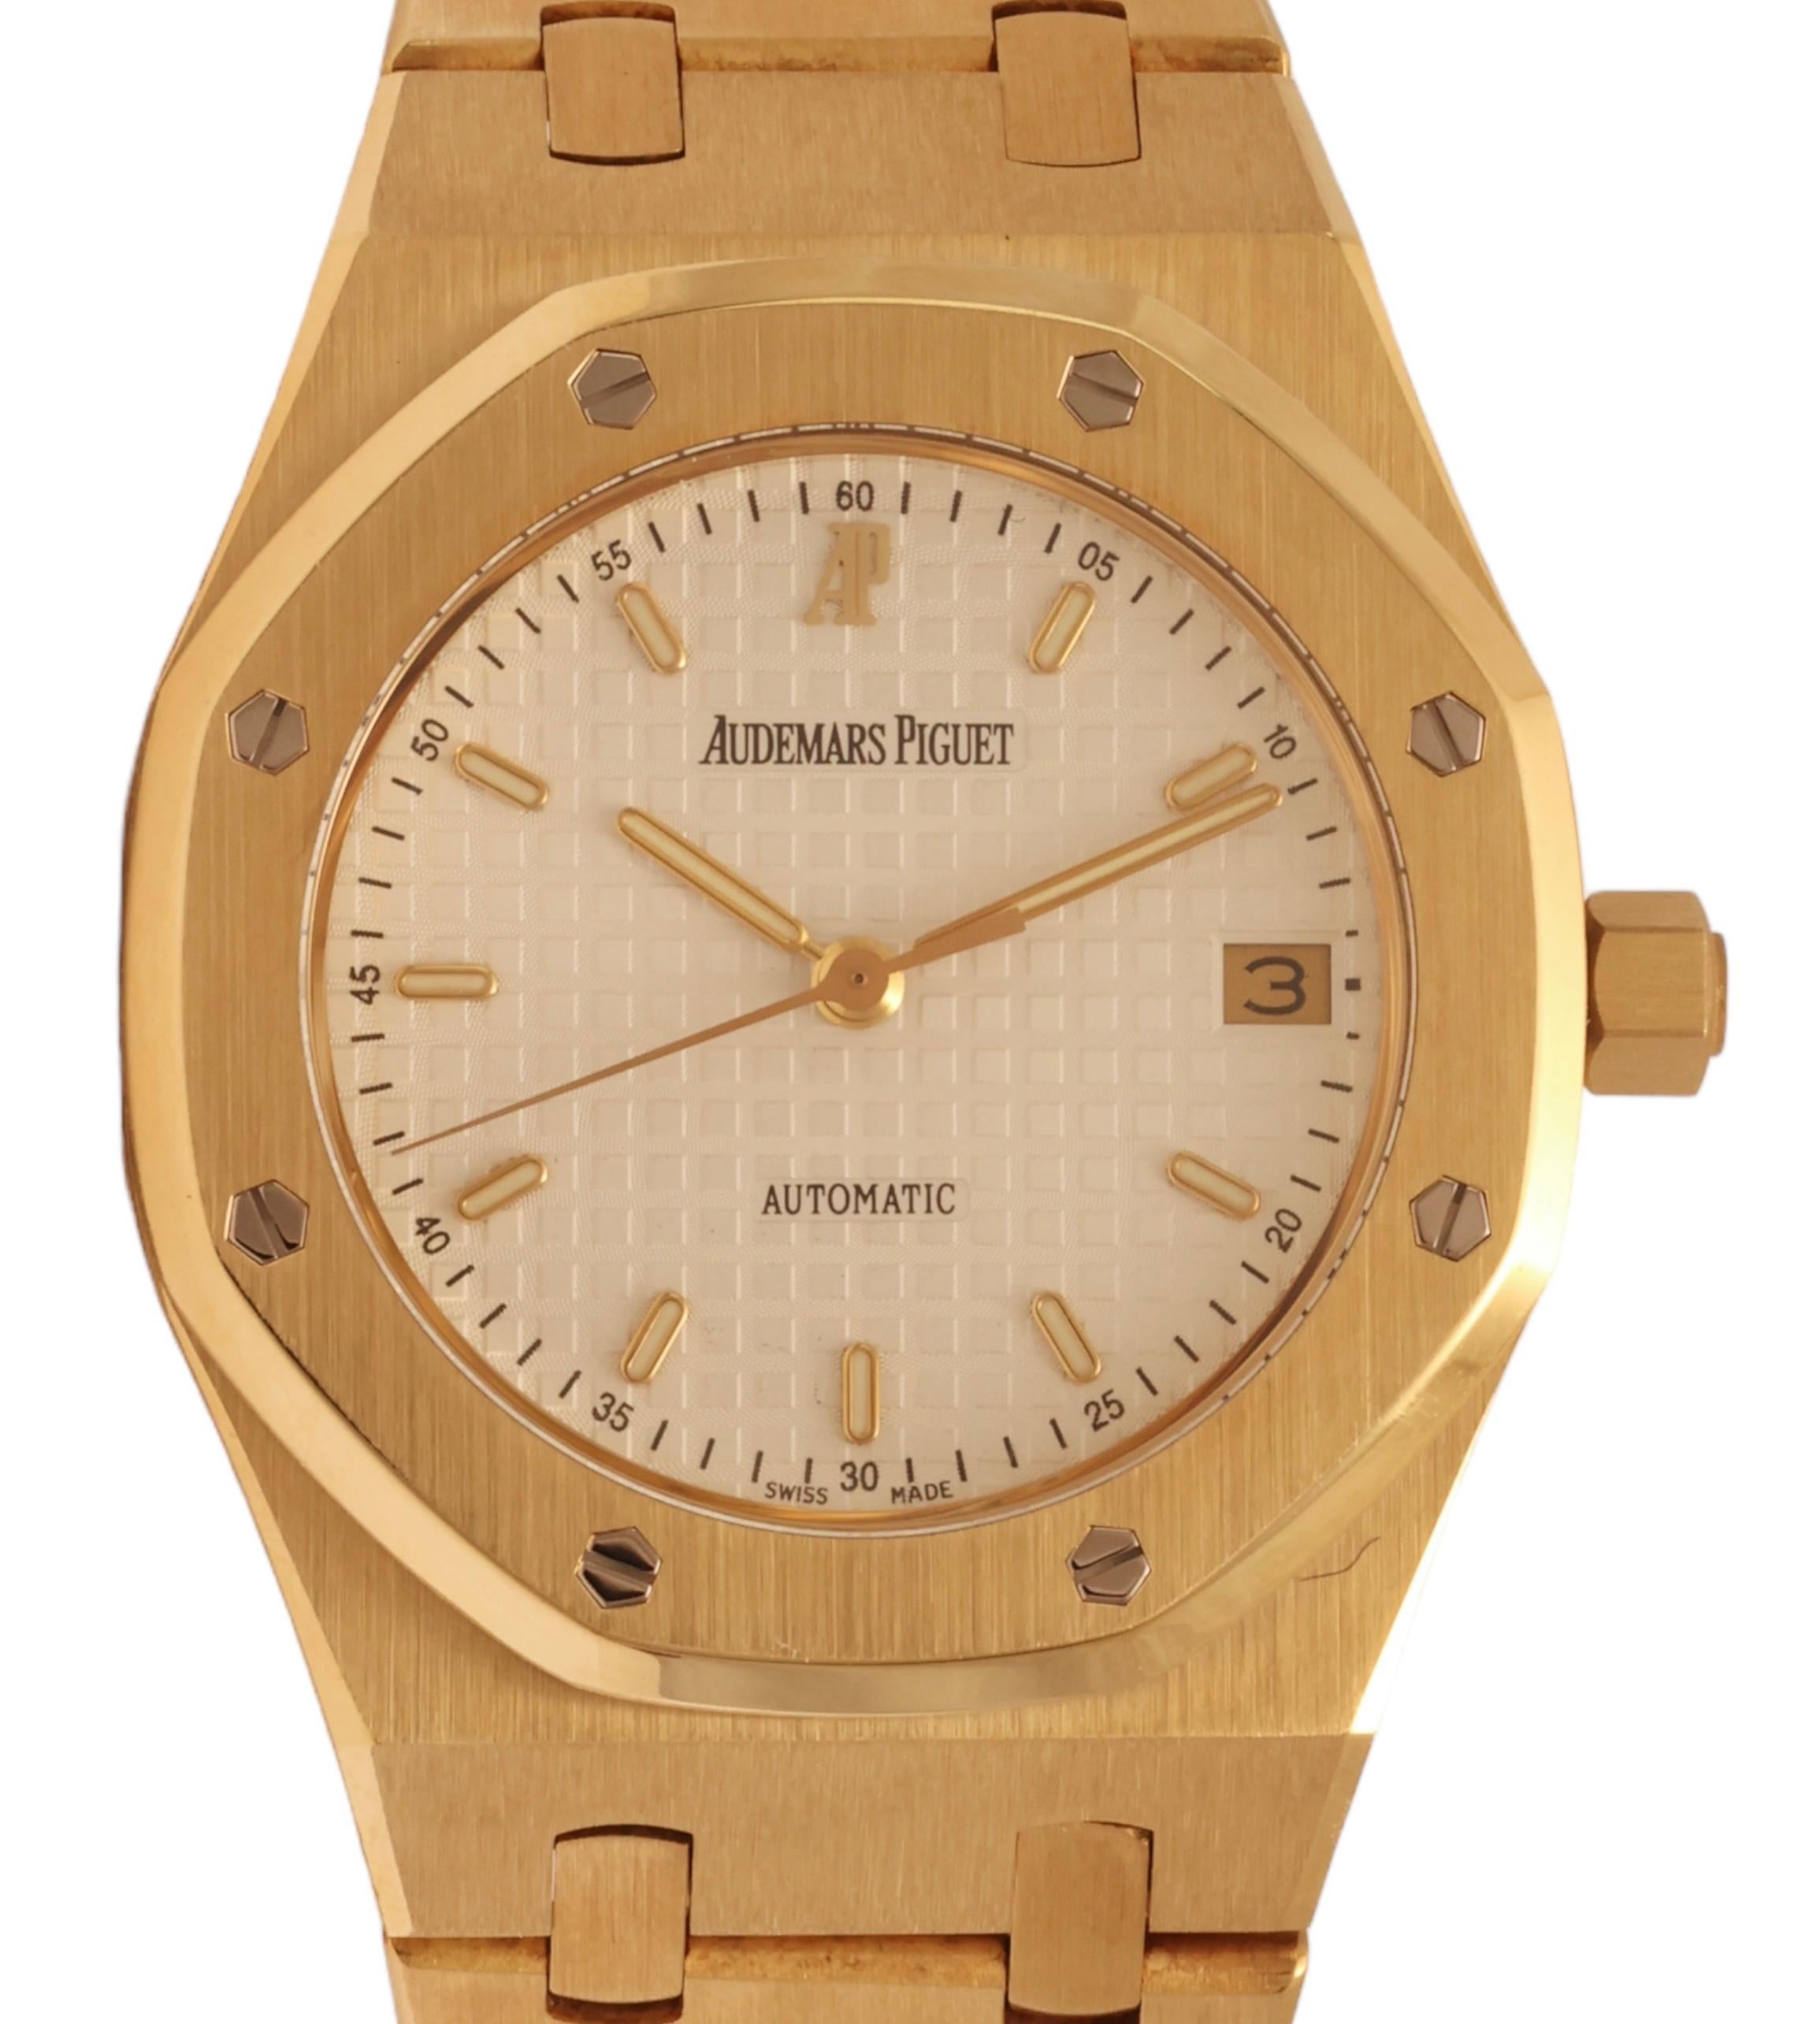 18 Kt Solid Gold Audemars Piguet Royal Oak 14790BA/O/0789BA/01 , Collectors Watch in Amazing Condition with Audemars Box & Papers

Comes with extra Audemars Croc Leather and Audemars Gold Folding Buckle to have the option to wear on croc leather